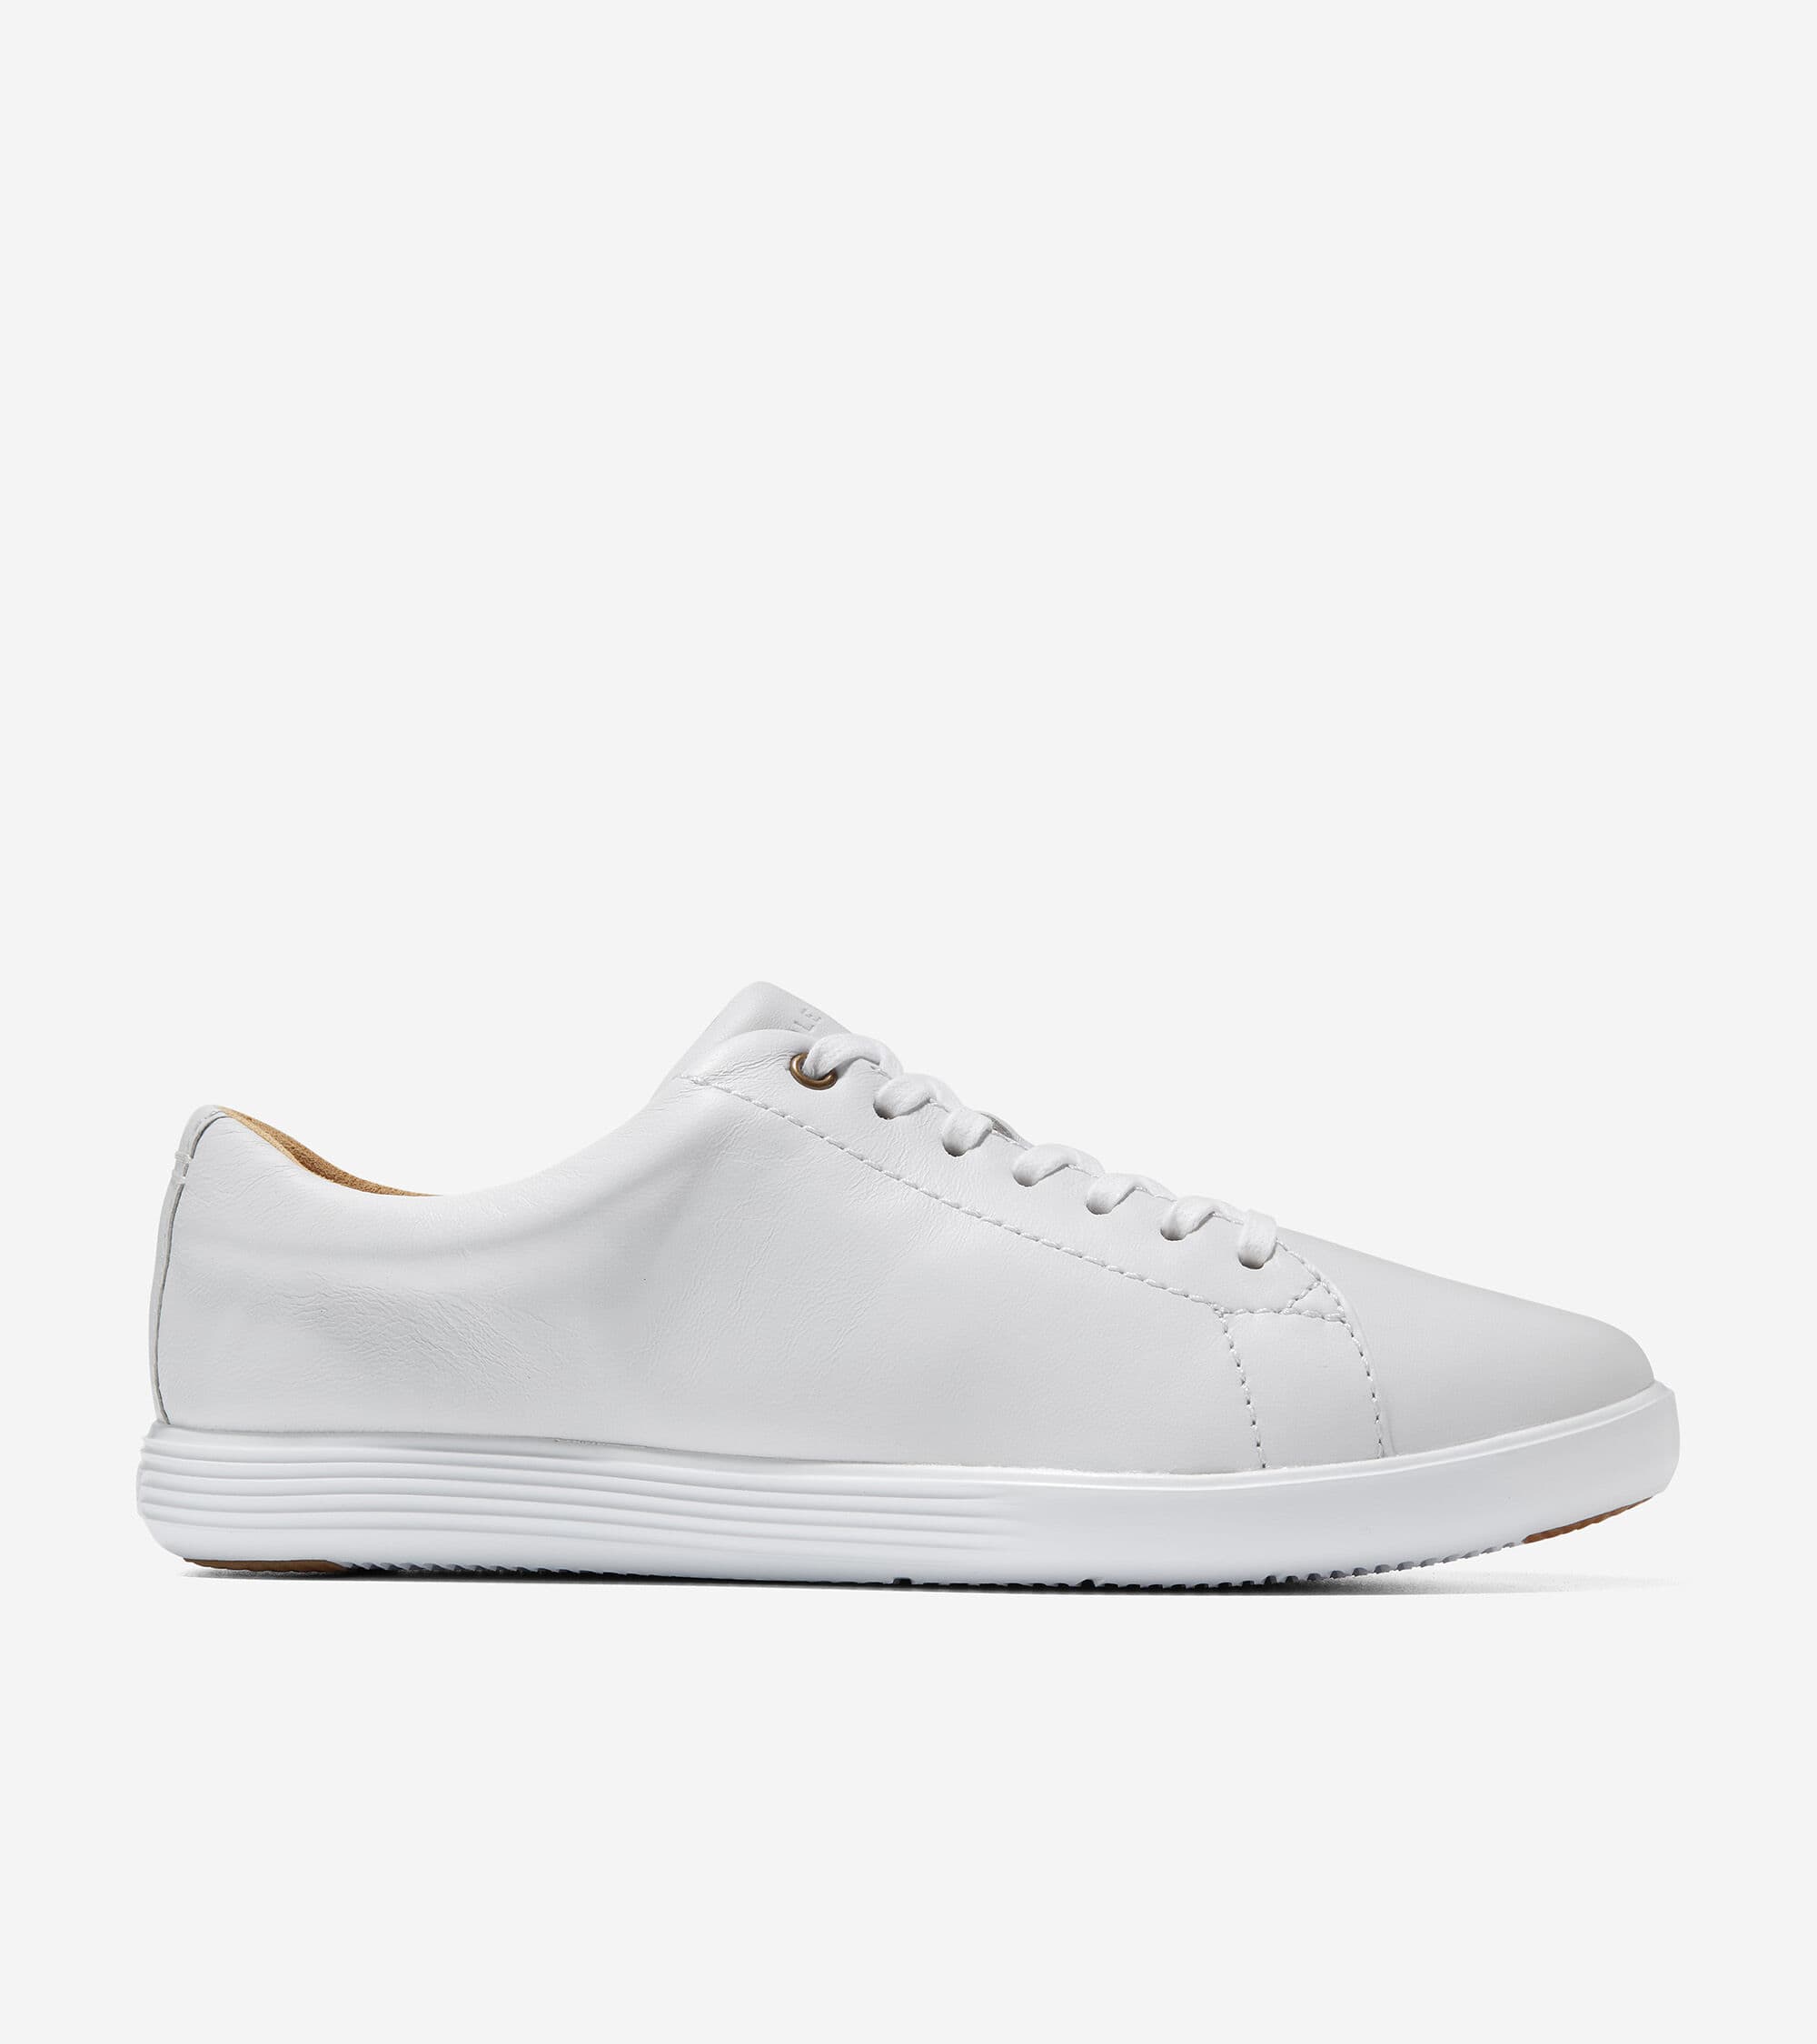 15 Best White Sneakers For Women That Are Fashionable And ...